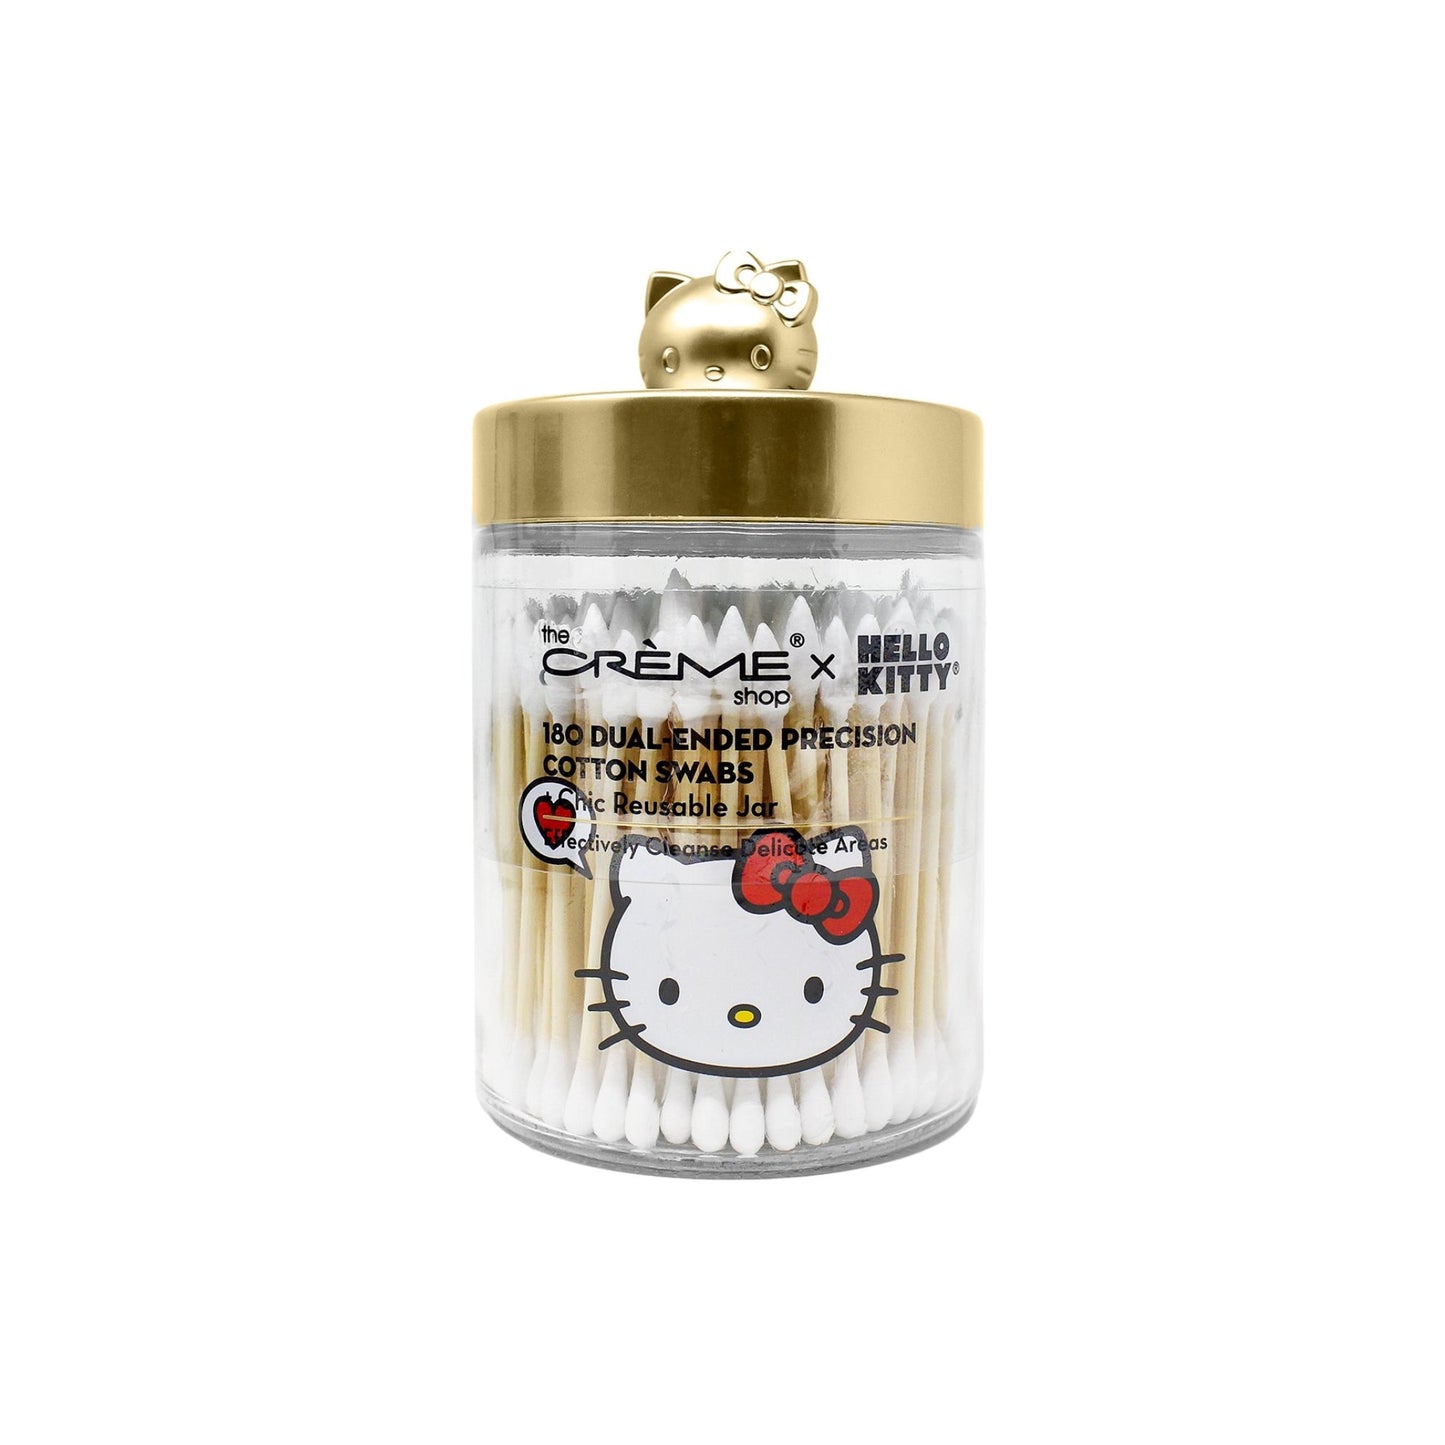 Hello Kitty Chic Reusable Jar with Cotton Swabs - Matte Gold Tool The Crème Shop x Sanrio 